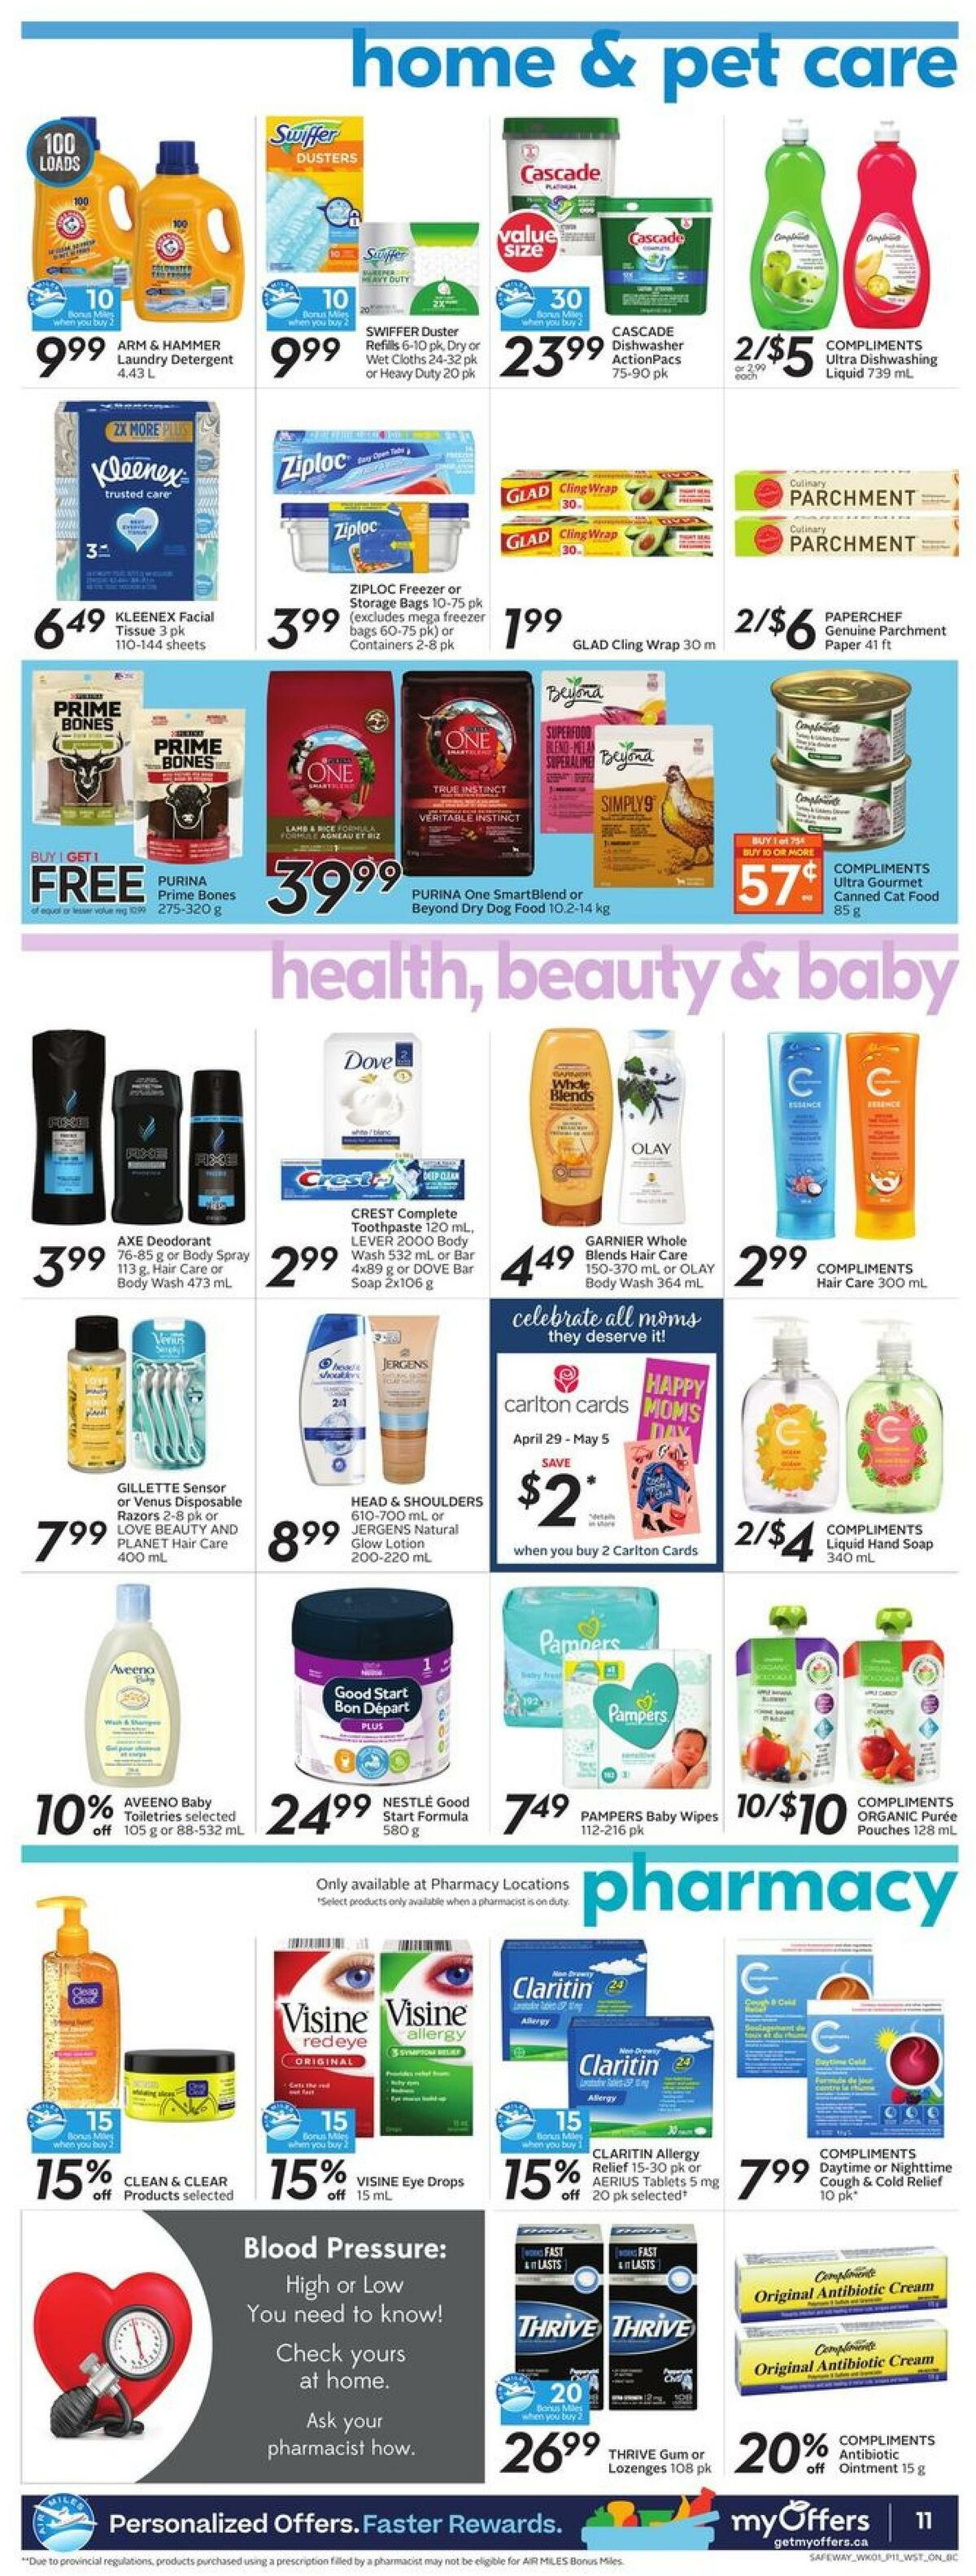 Safeway Flyer from April 29